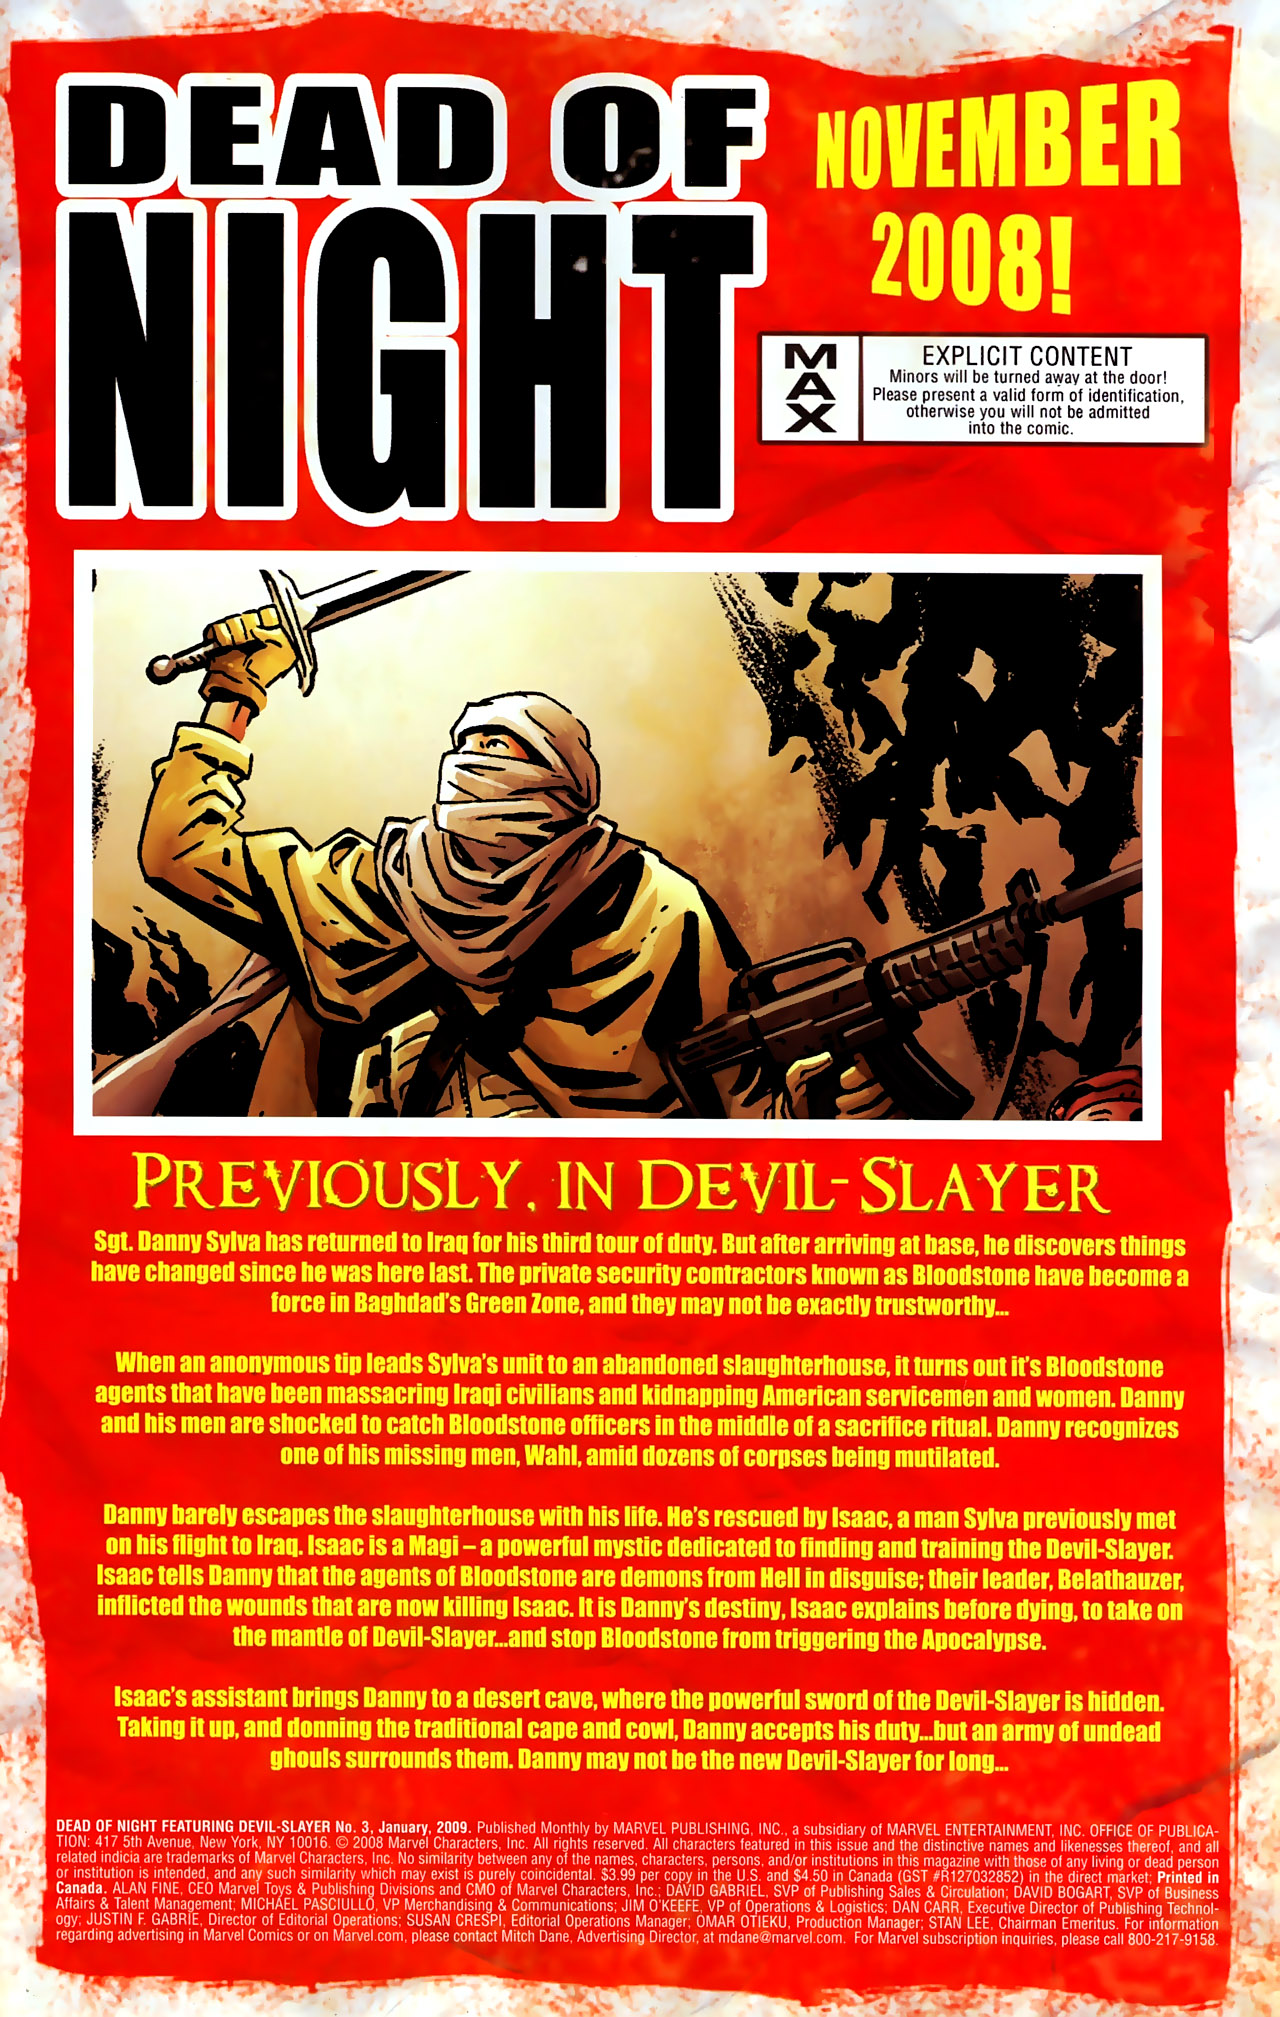 Read online Dead of Night Featuring Devil-Slayer comic -  Issue #3 - 2